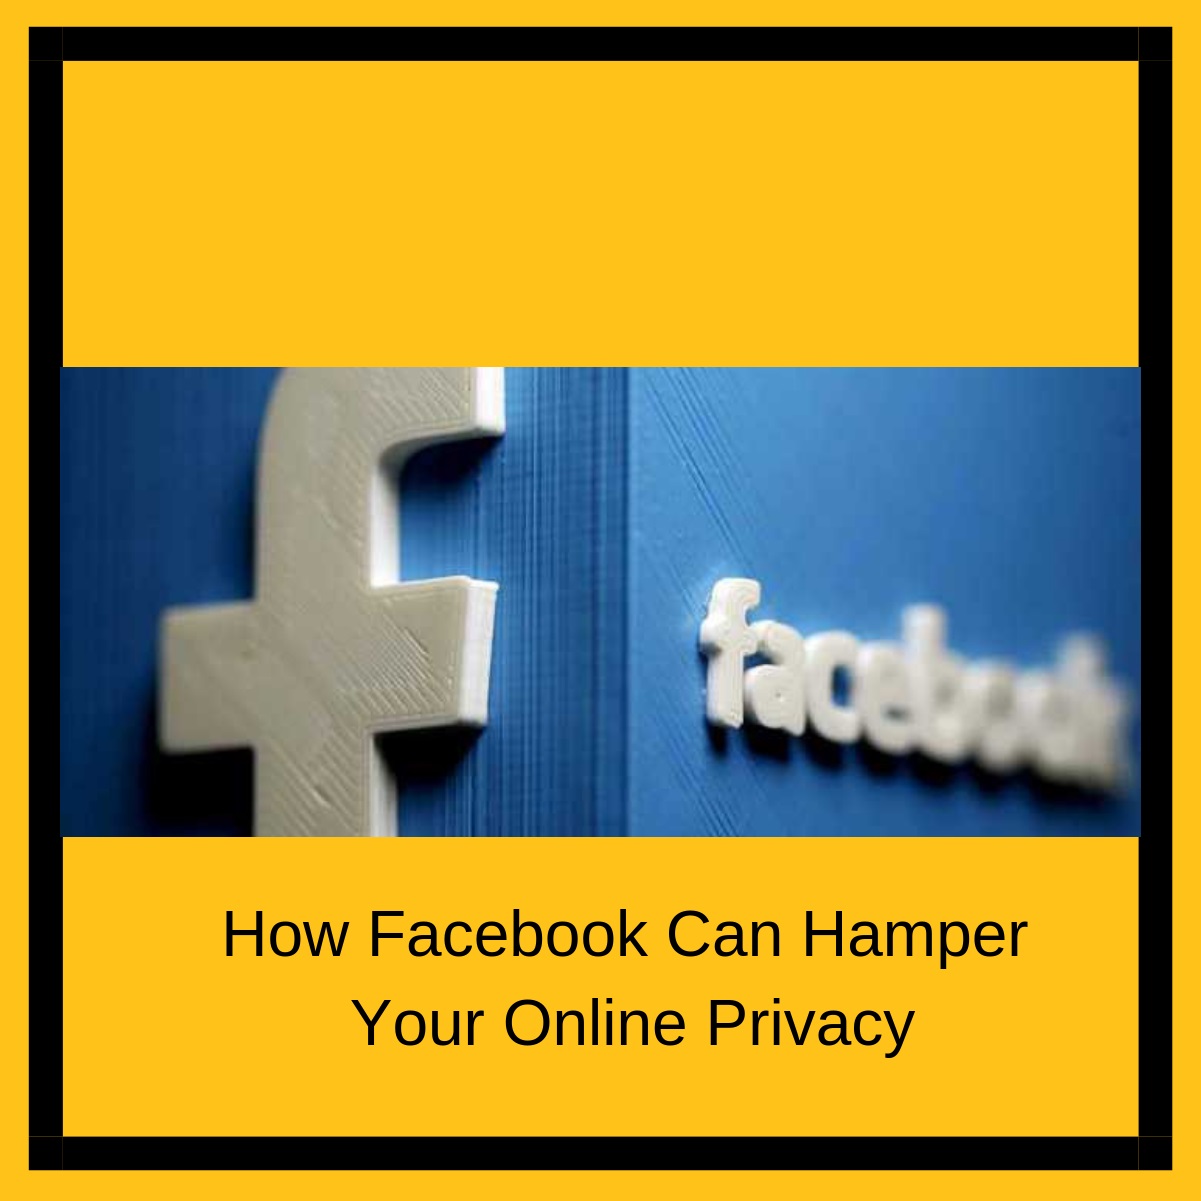 How Facebook Can Hamper Your Online Privacy